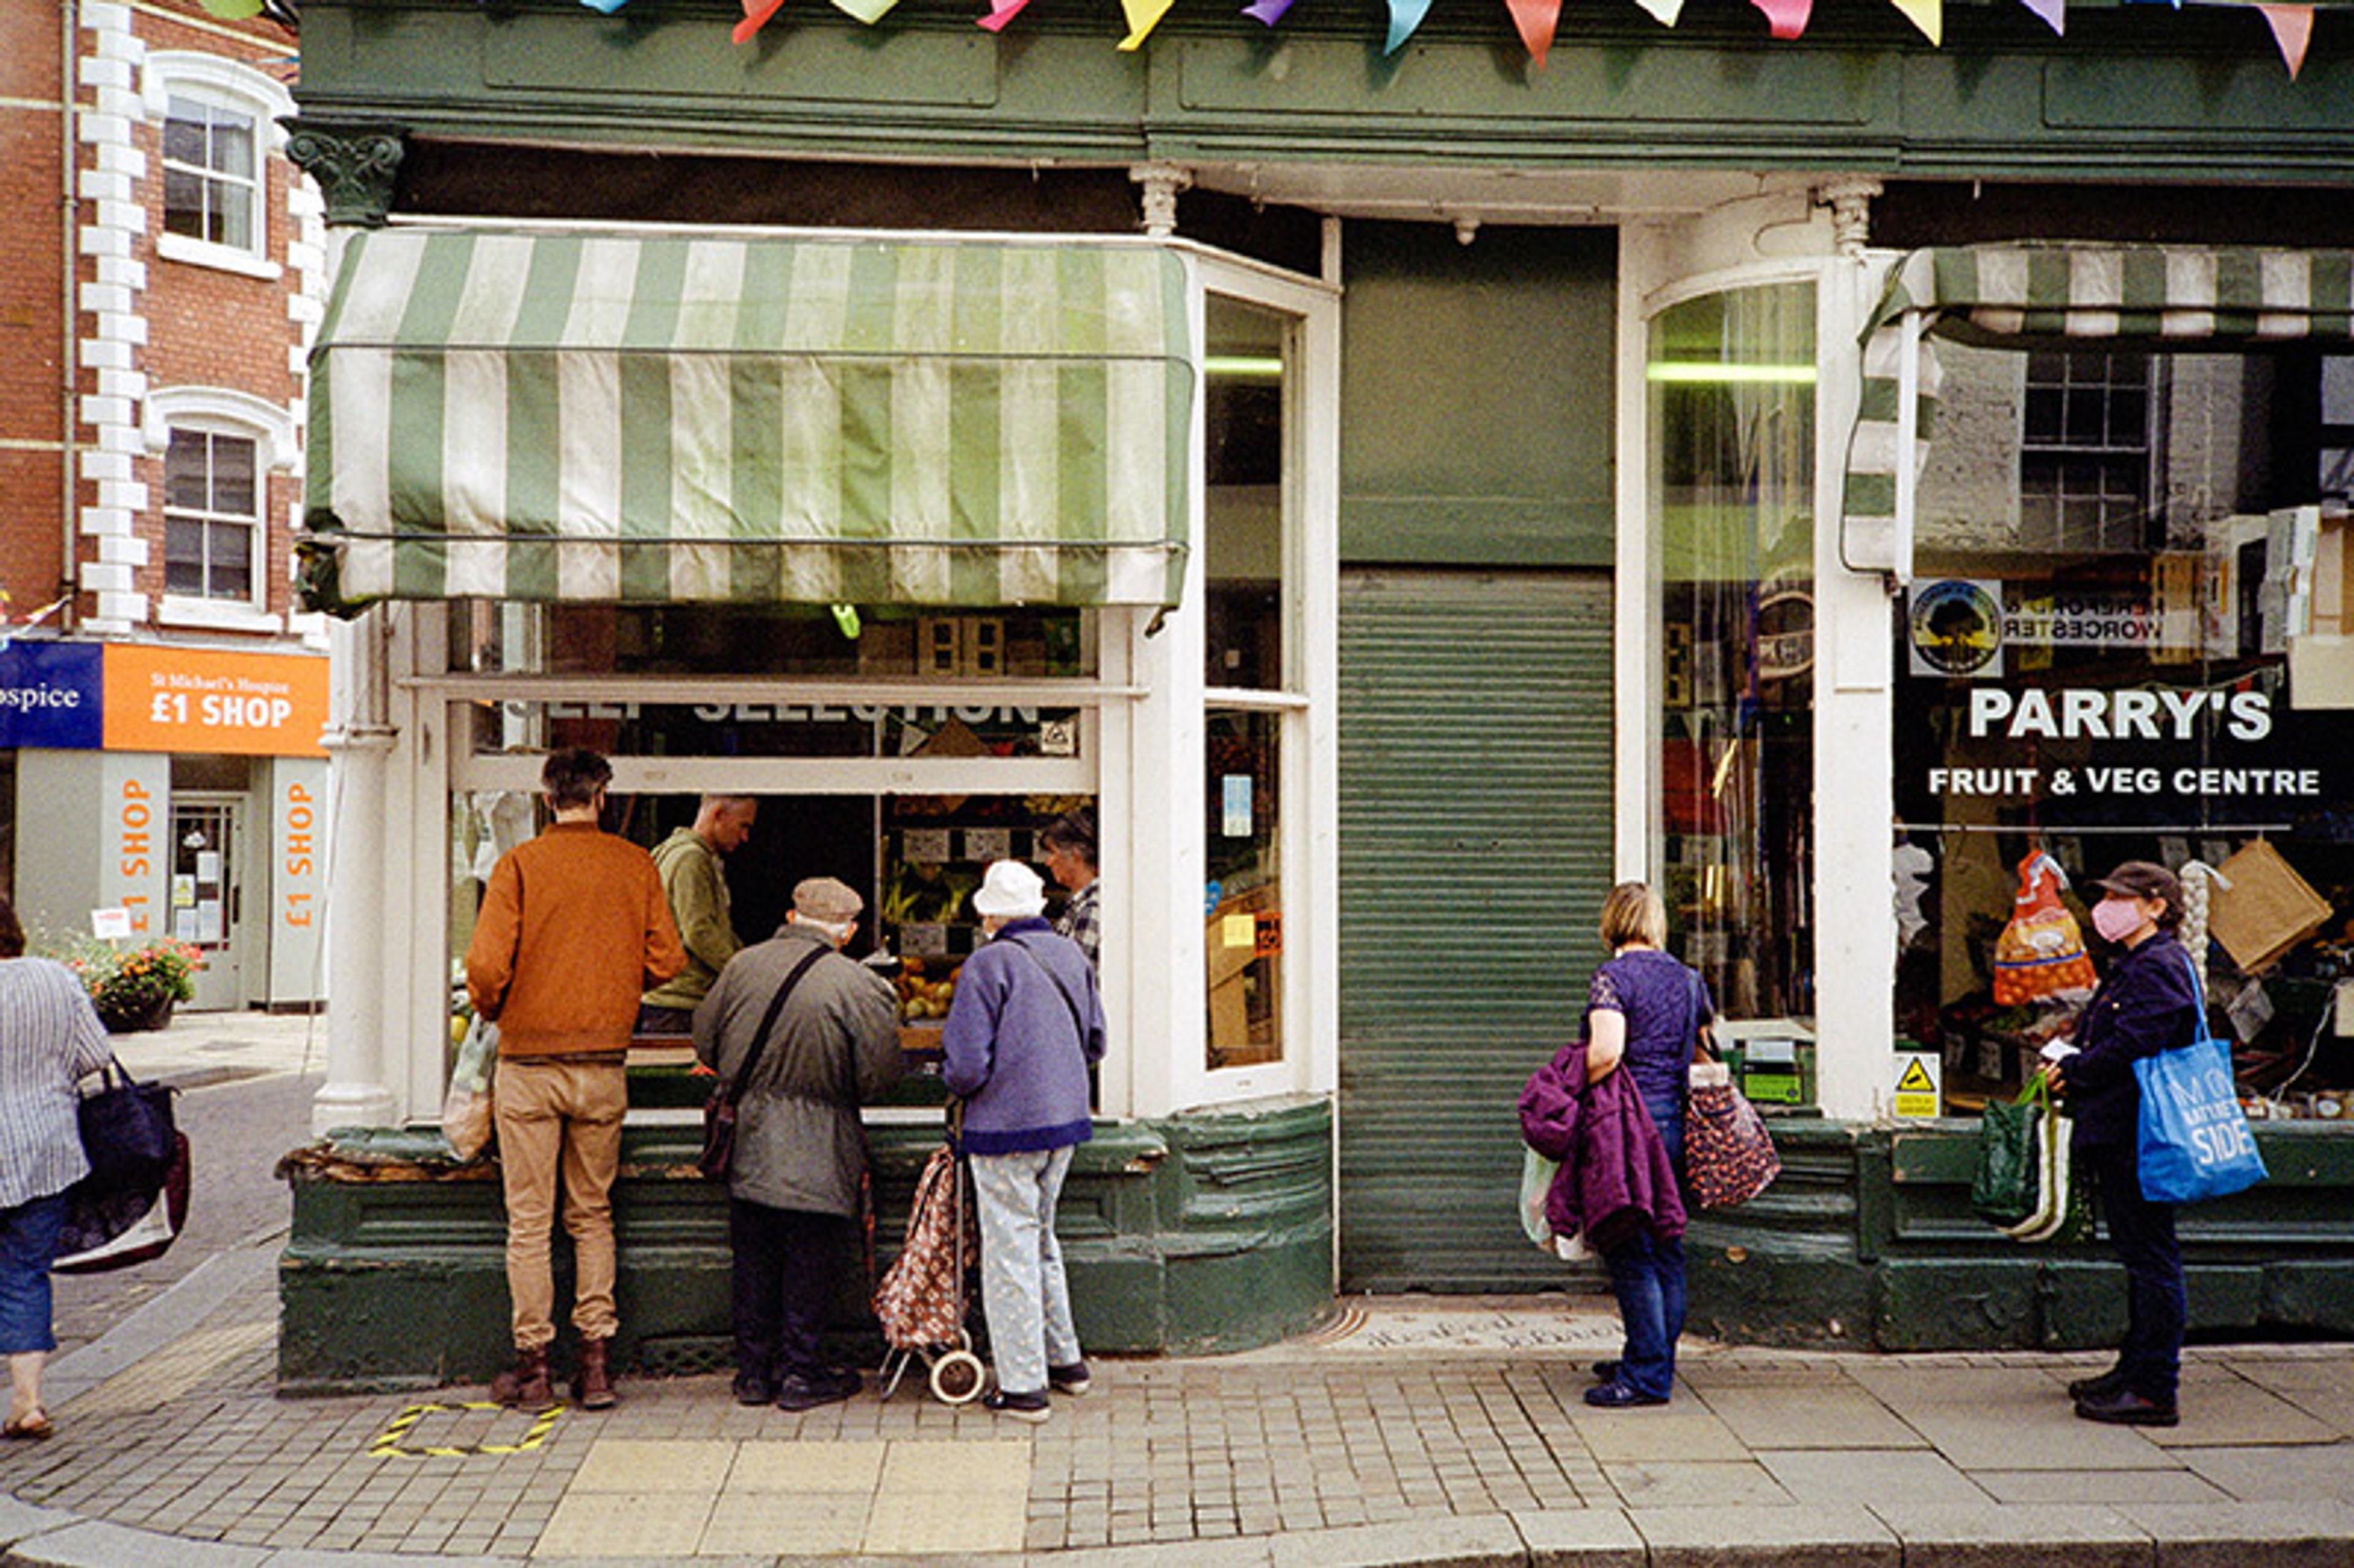 People of differing heights and ages queue outside a traditional greengrocer’s shop